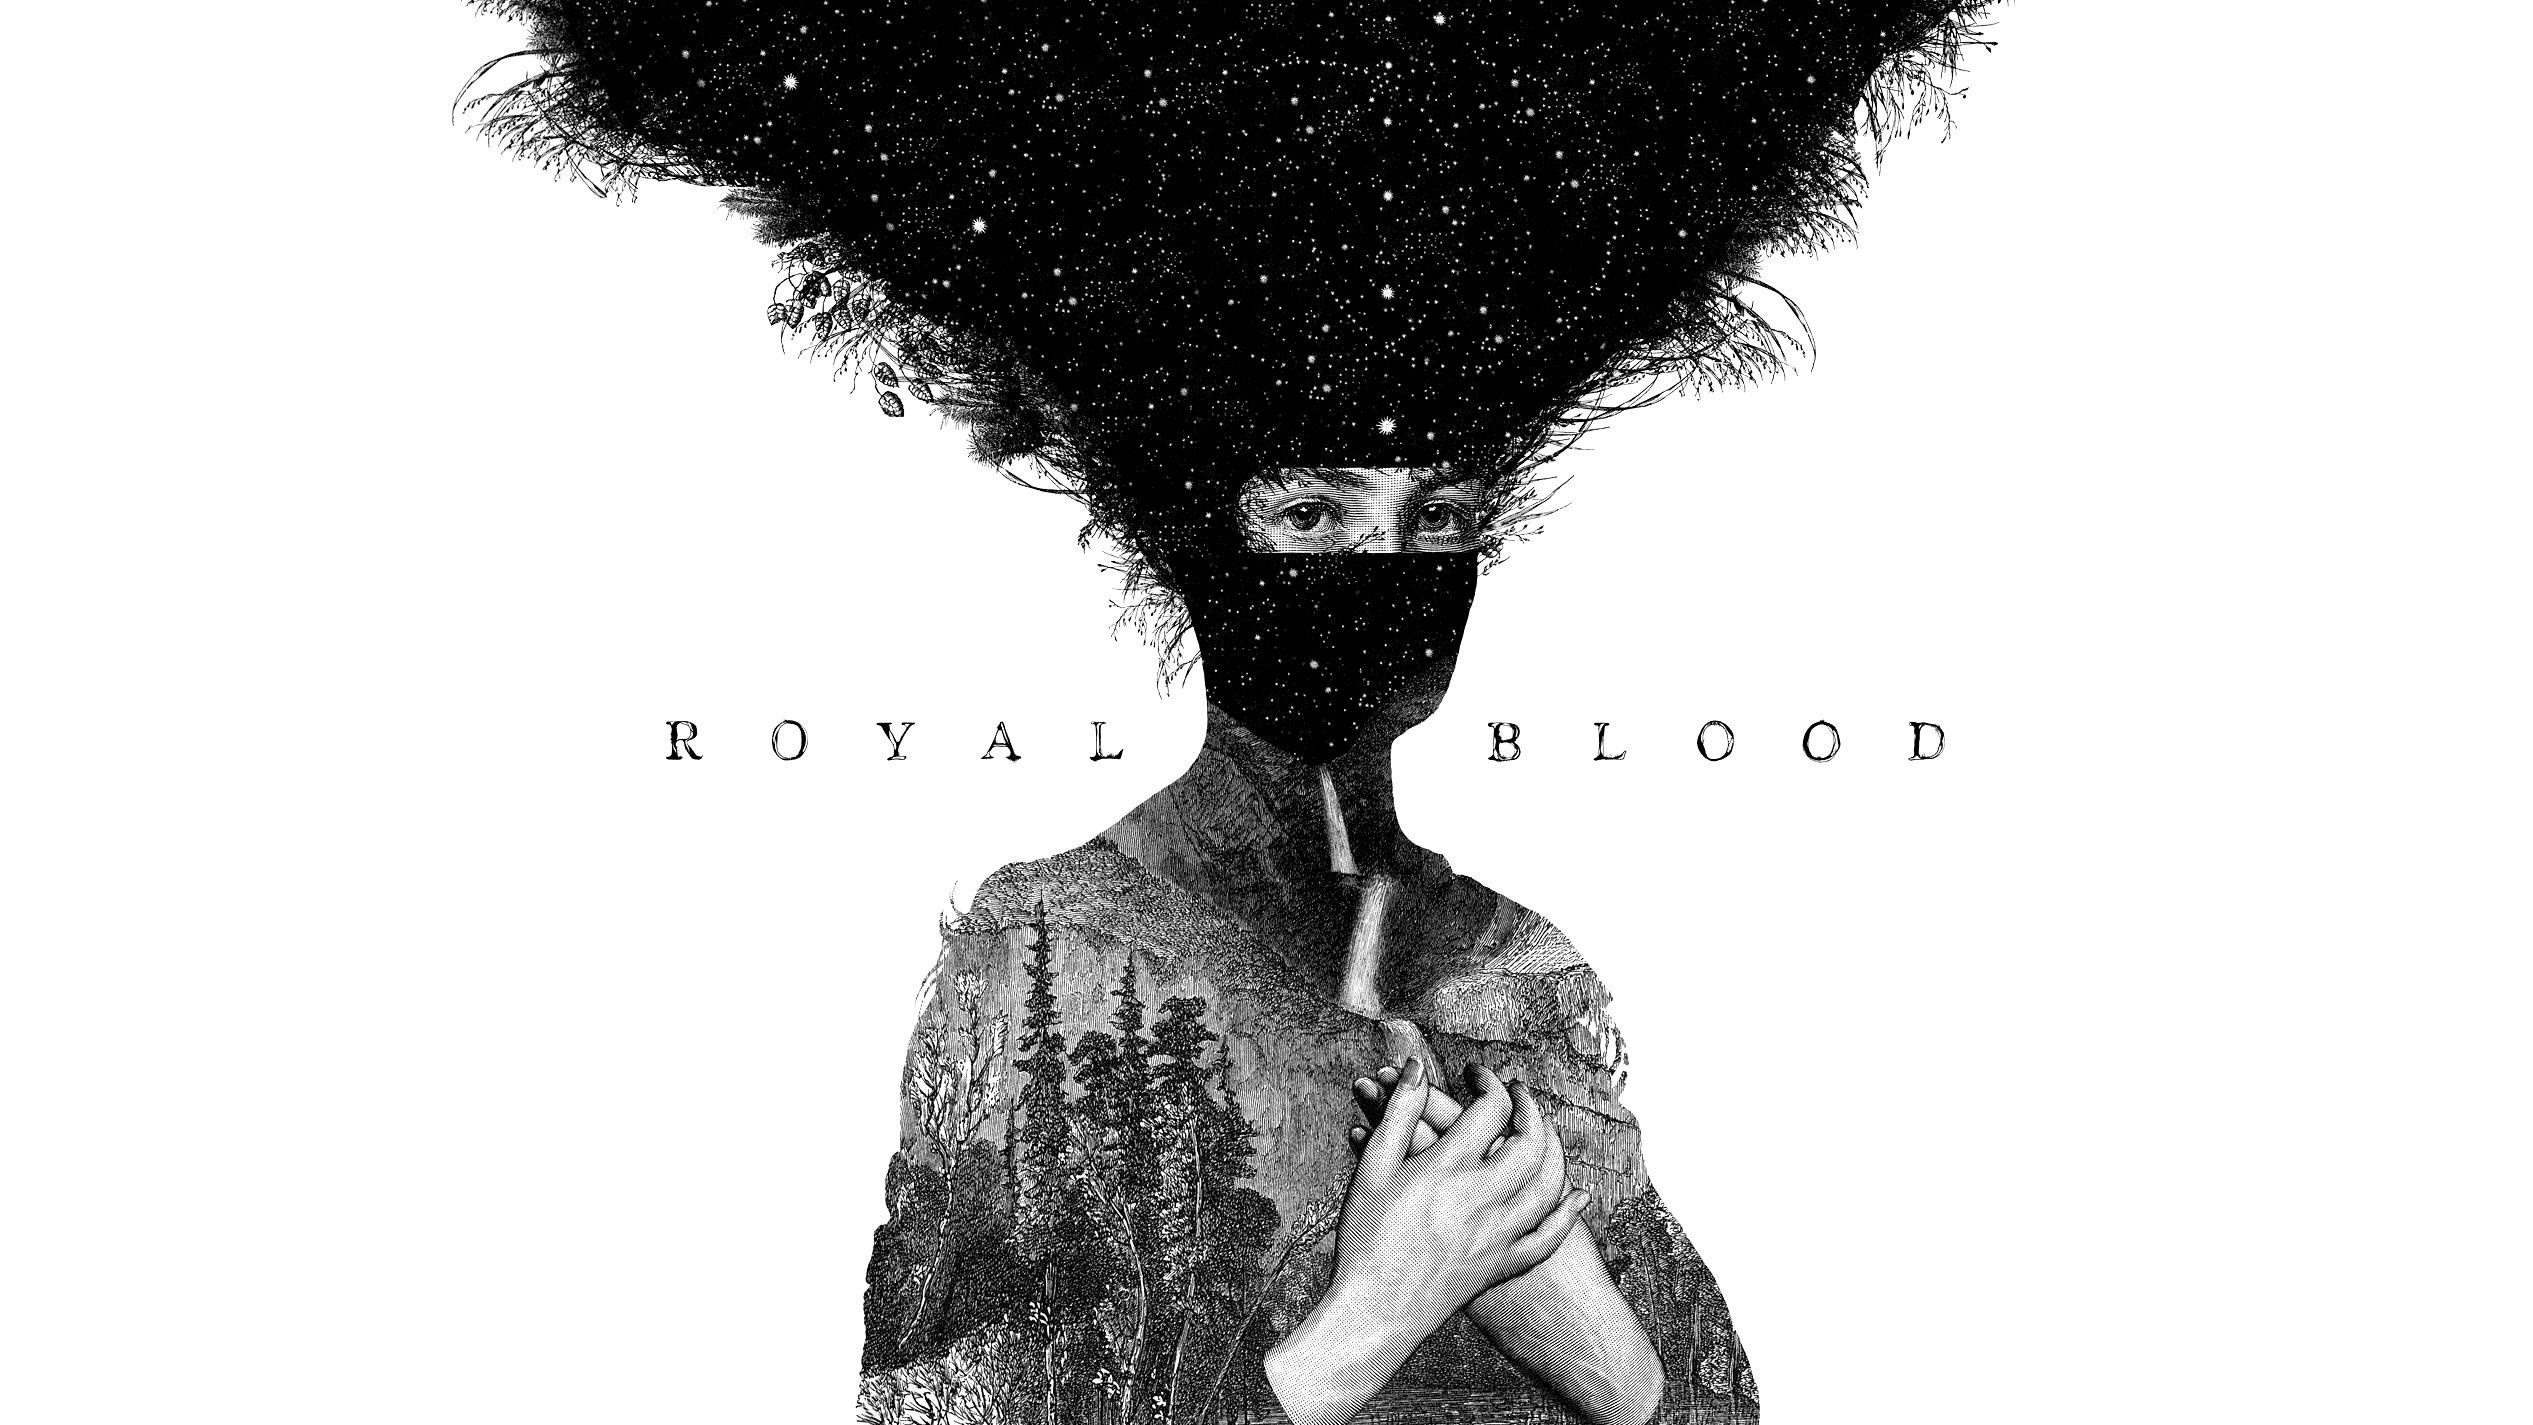 Royal Blood Wallpapers - Top Free Royal Blood Backgrounds 2540x1430